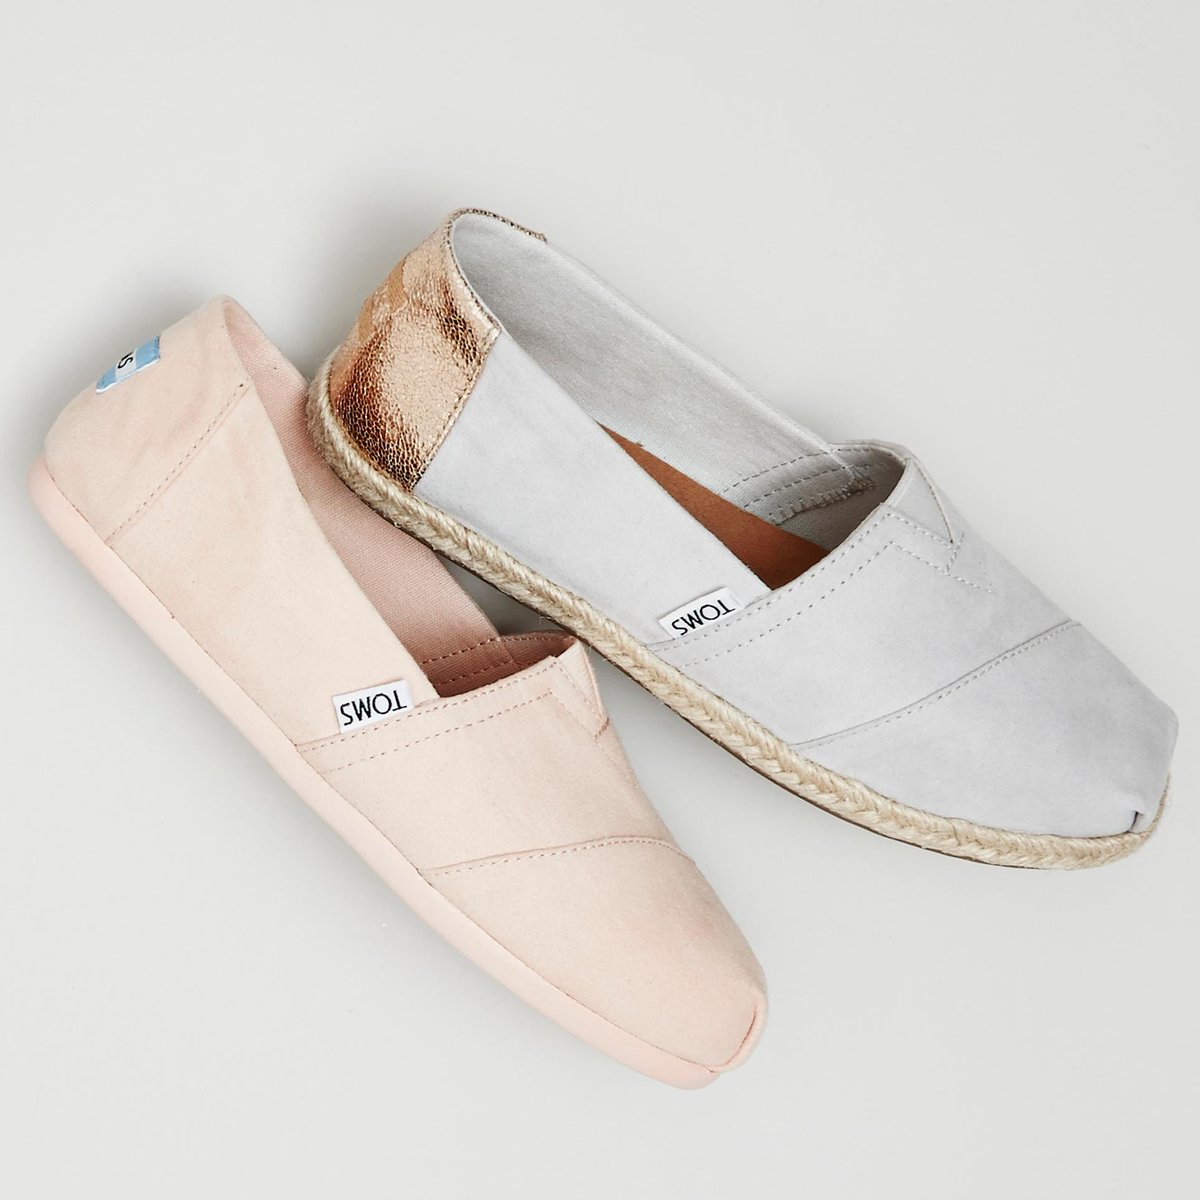 Time to treat yourself to TOMS Seasonal 